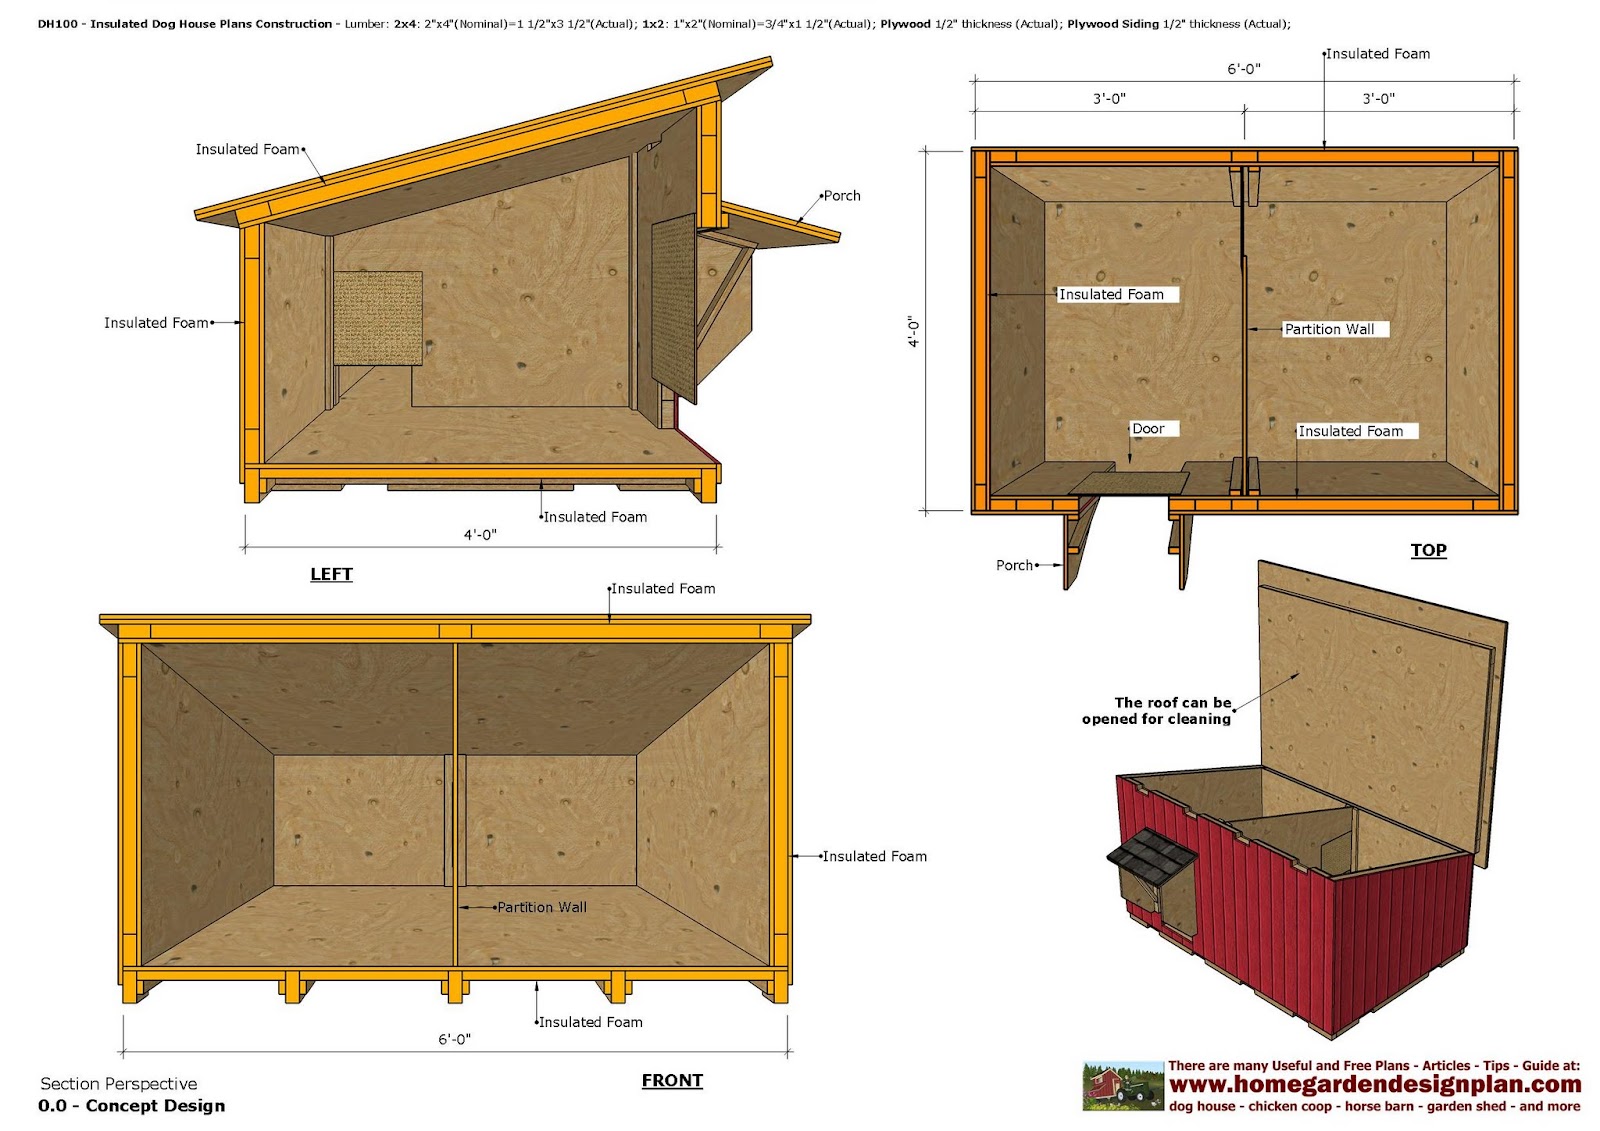 home garden plans: DH100 - Insulated Dog House Plans - Dog ...